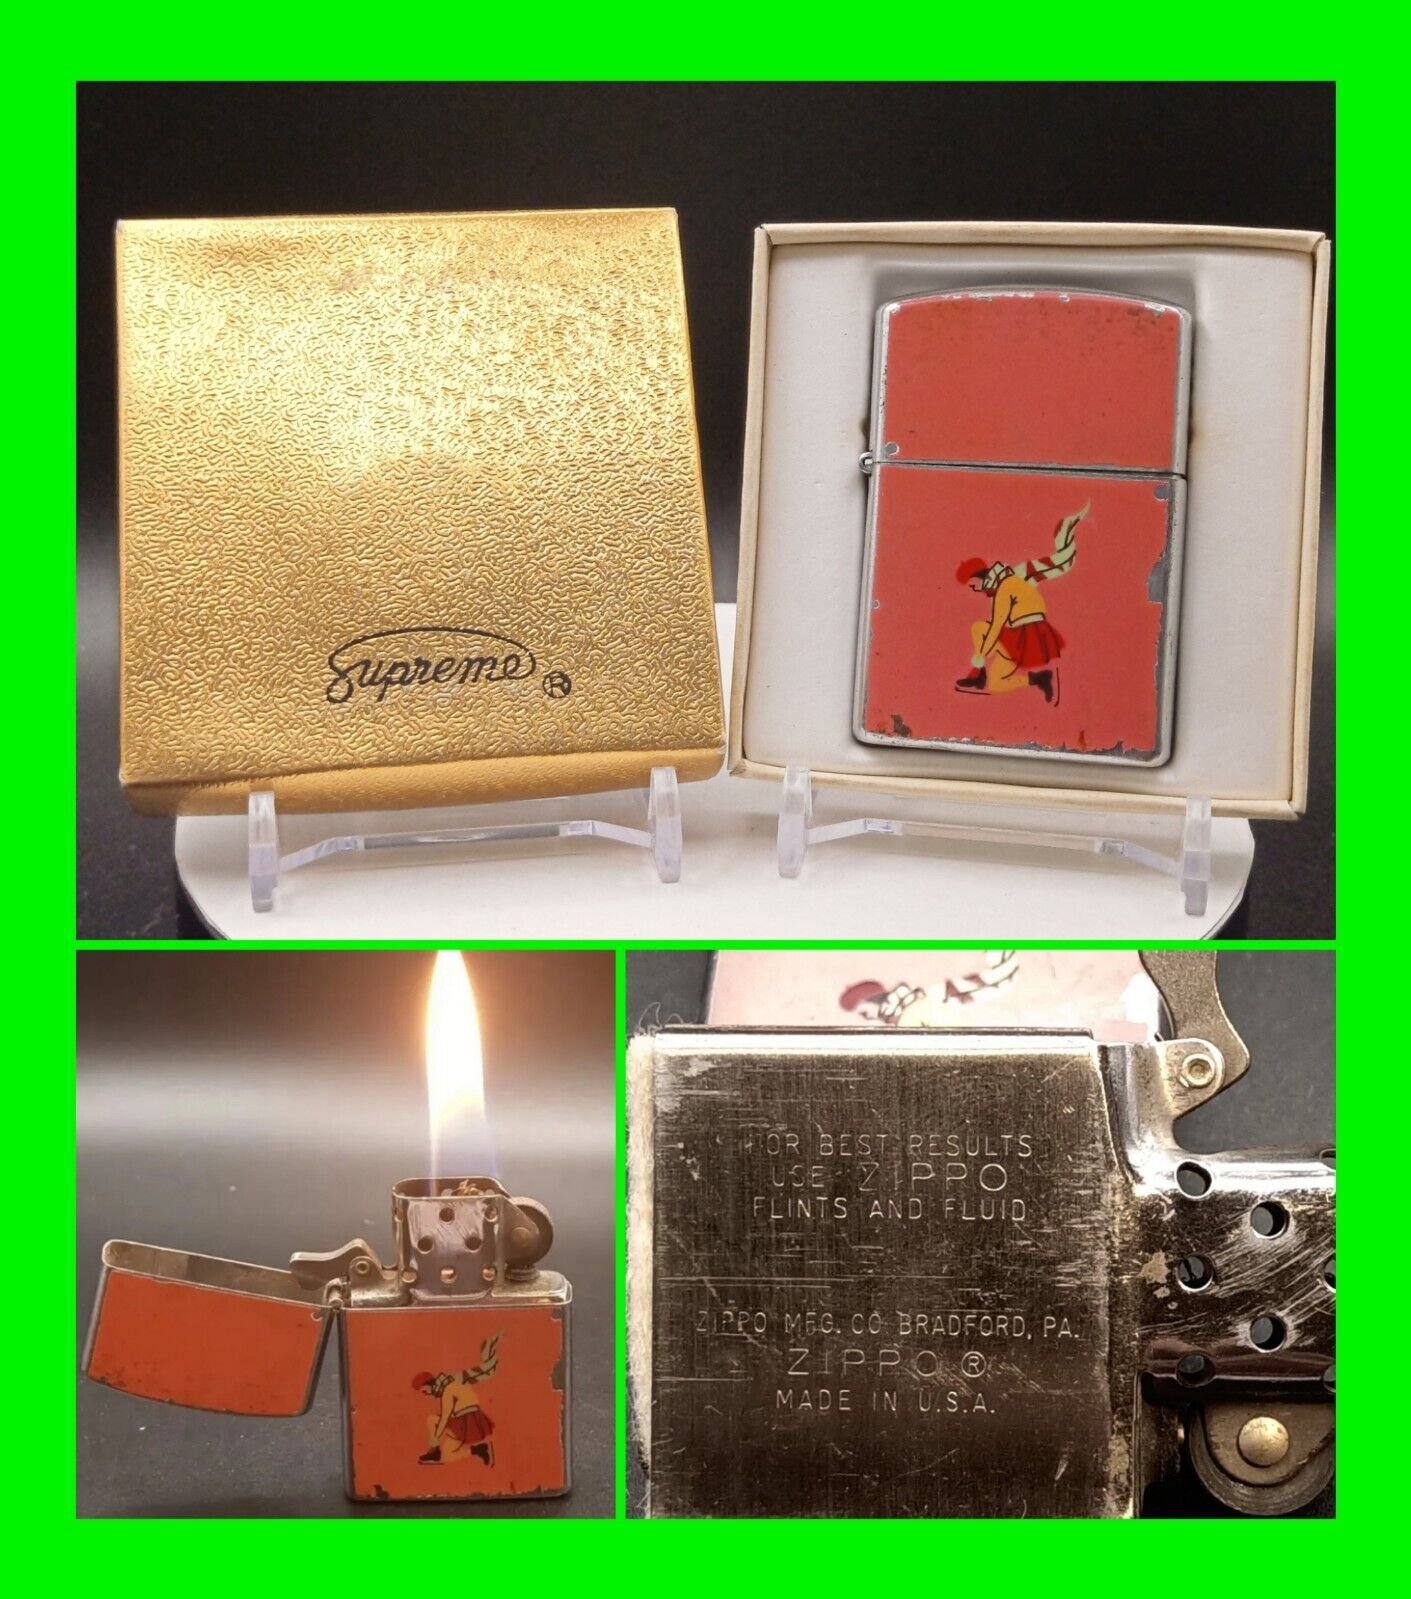 Unique Vintage Enamel Petrol Supreme Lighter With Zippo Insert And Box - Working